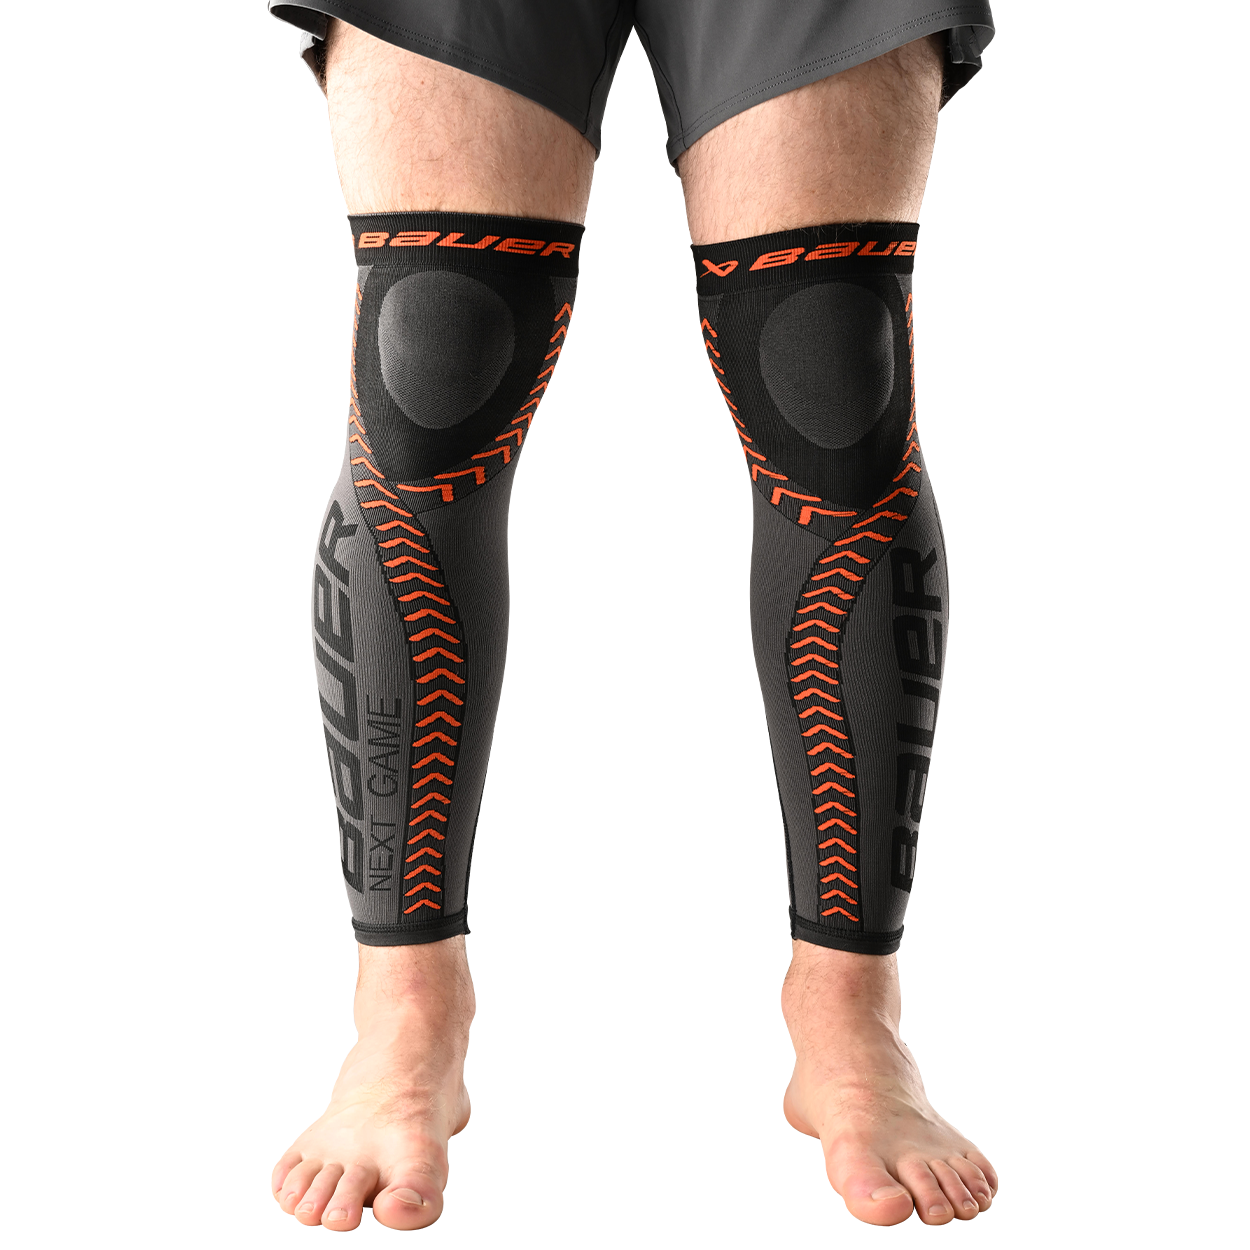 Do compression sleeves enhance athletic performance and recovery?